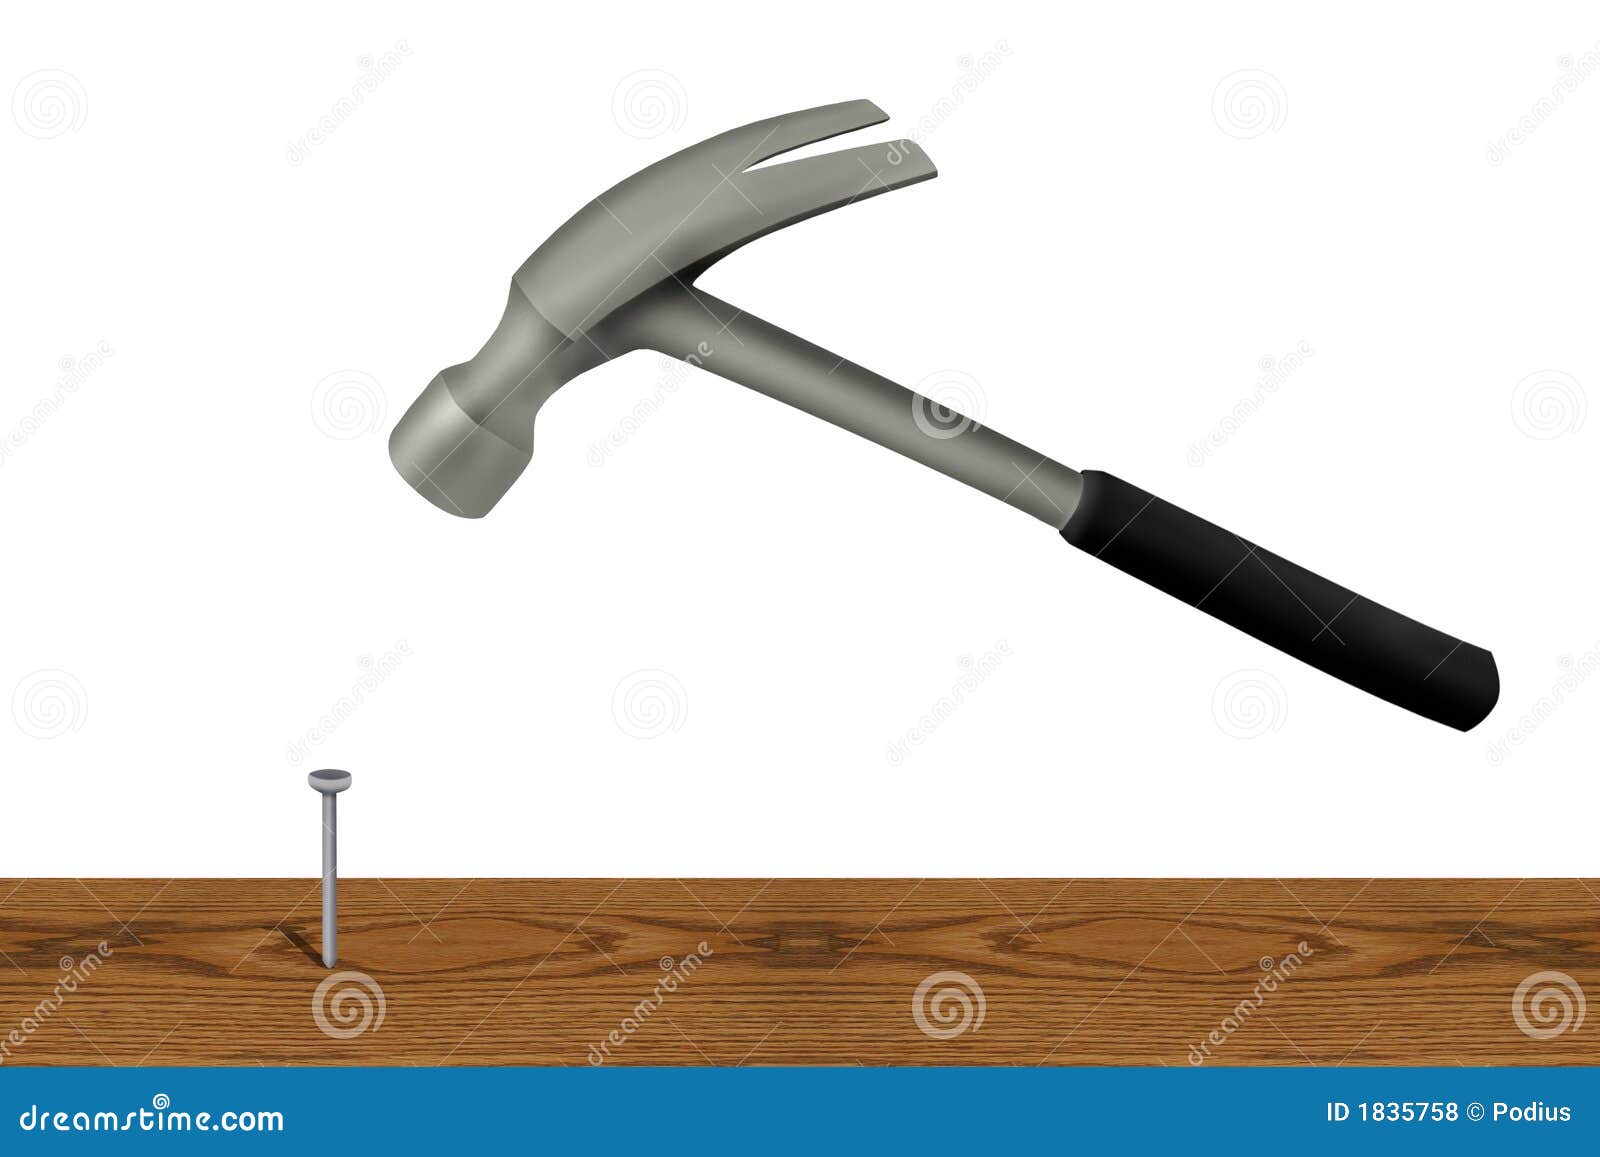 hammer and nails clipart - photo #8